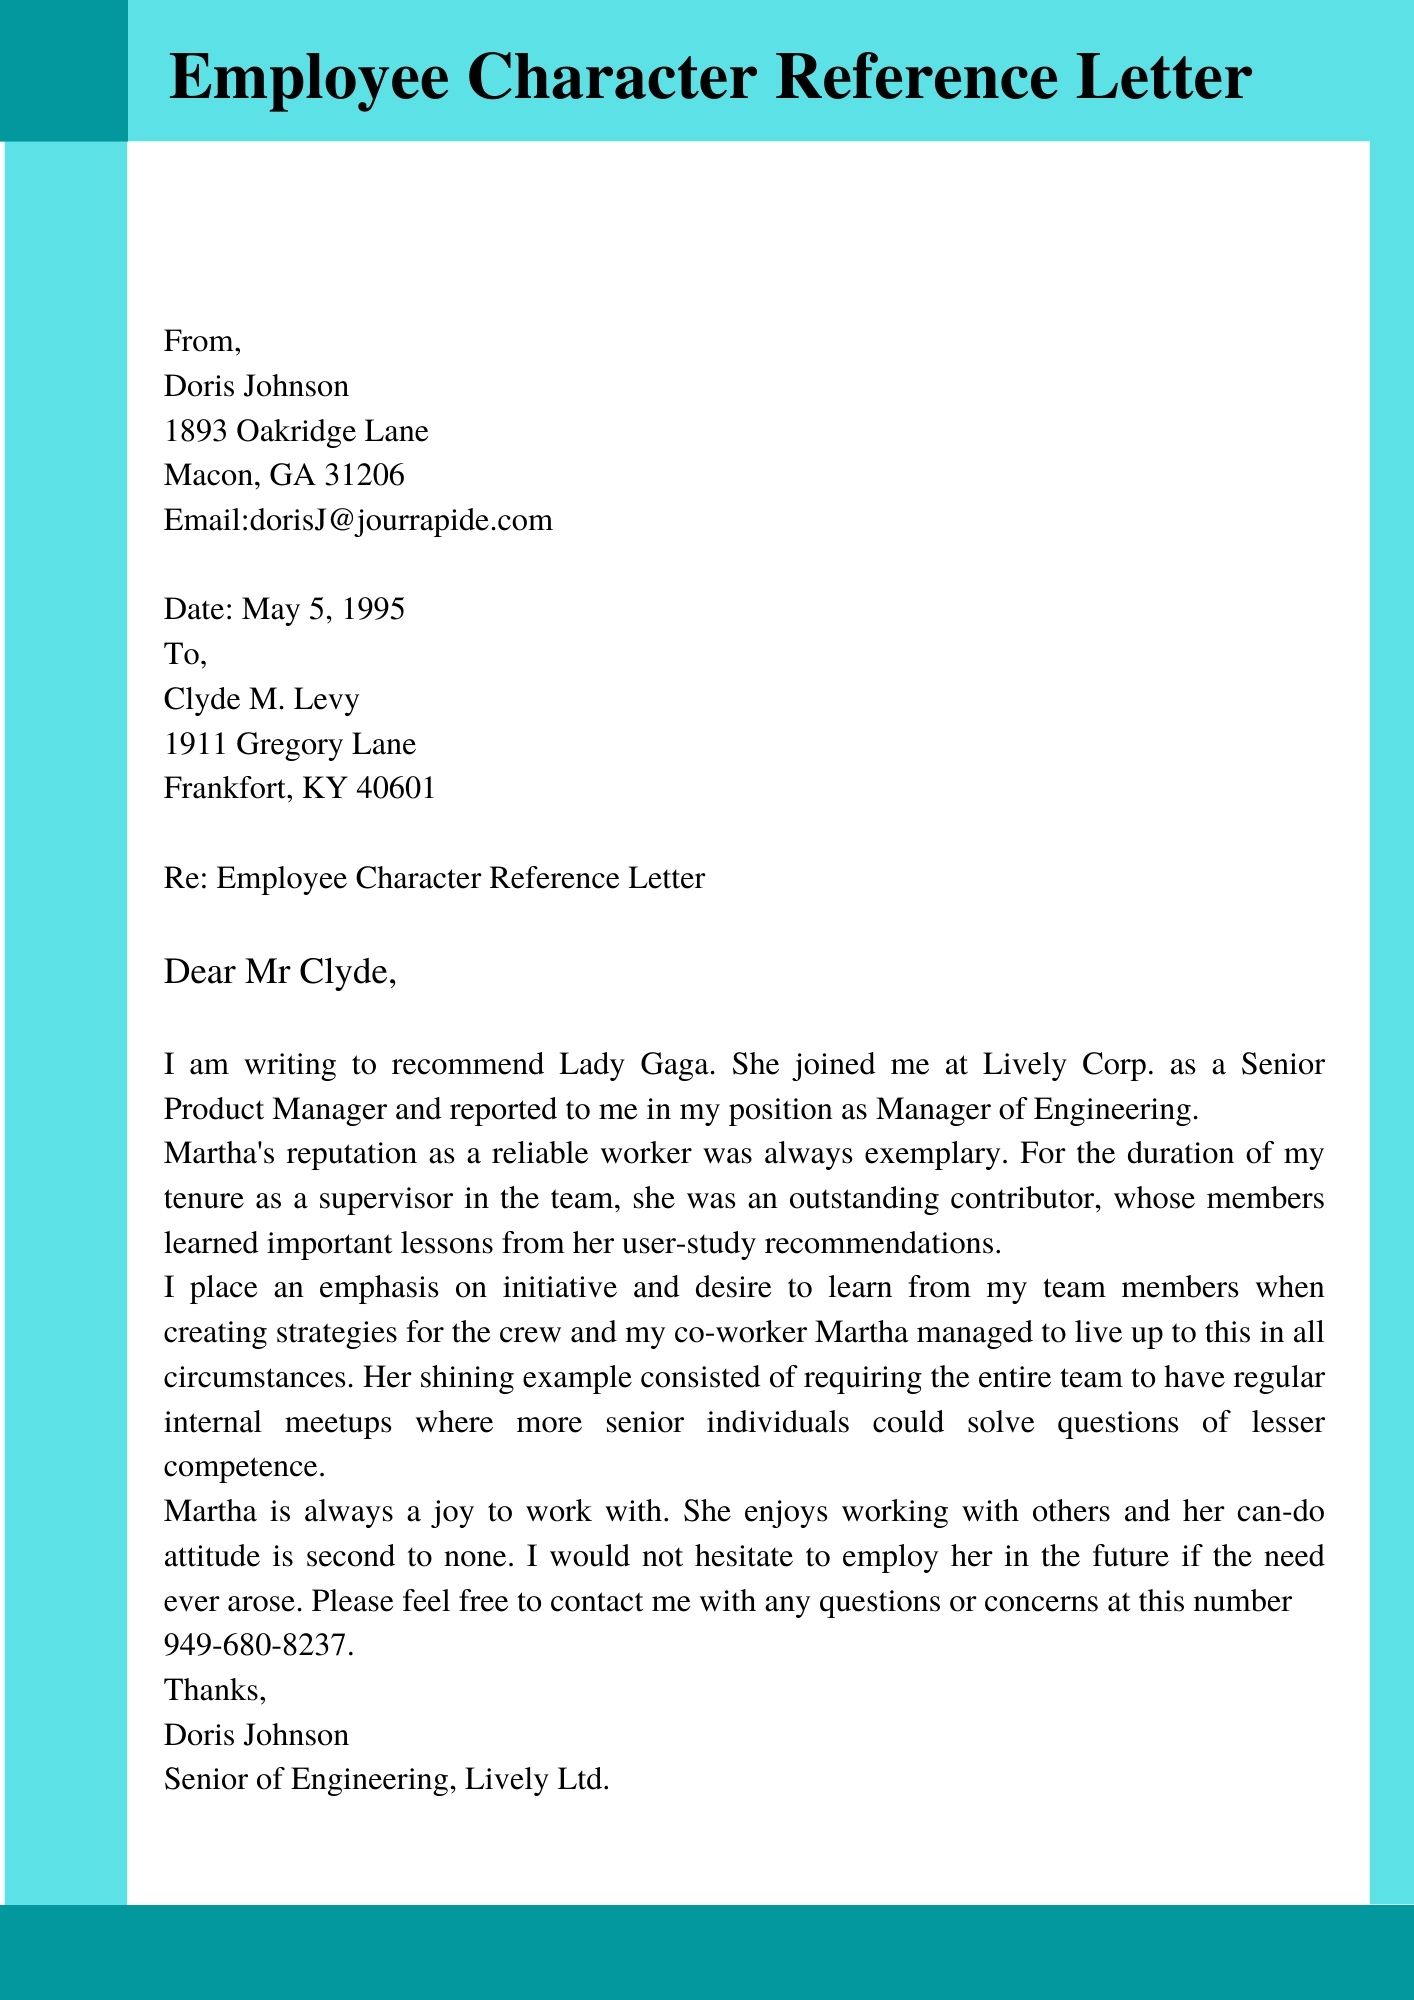 Character Reference Letter for Employee